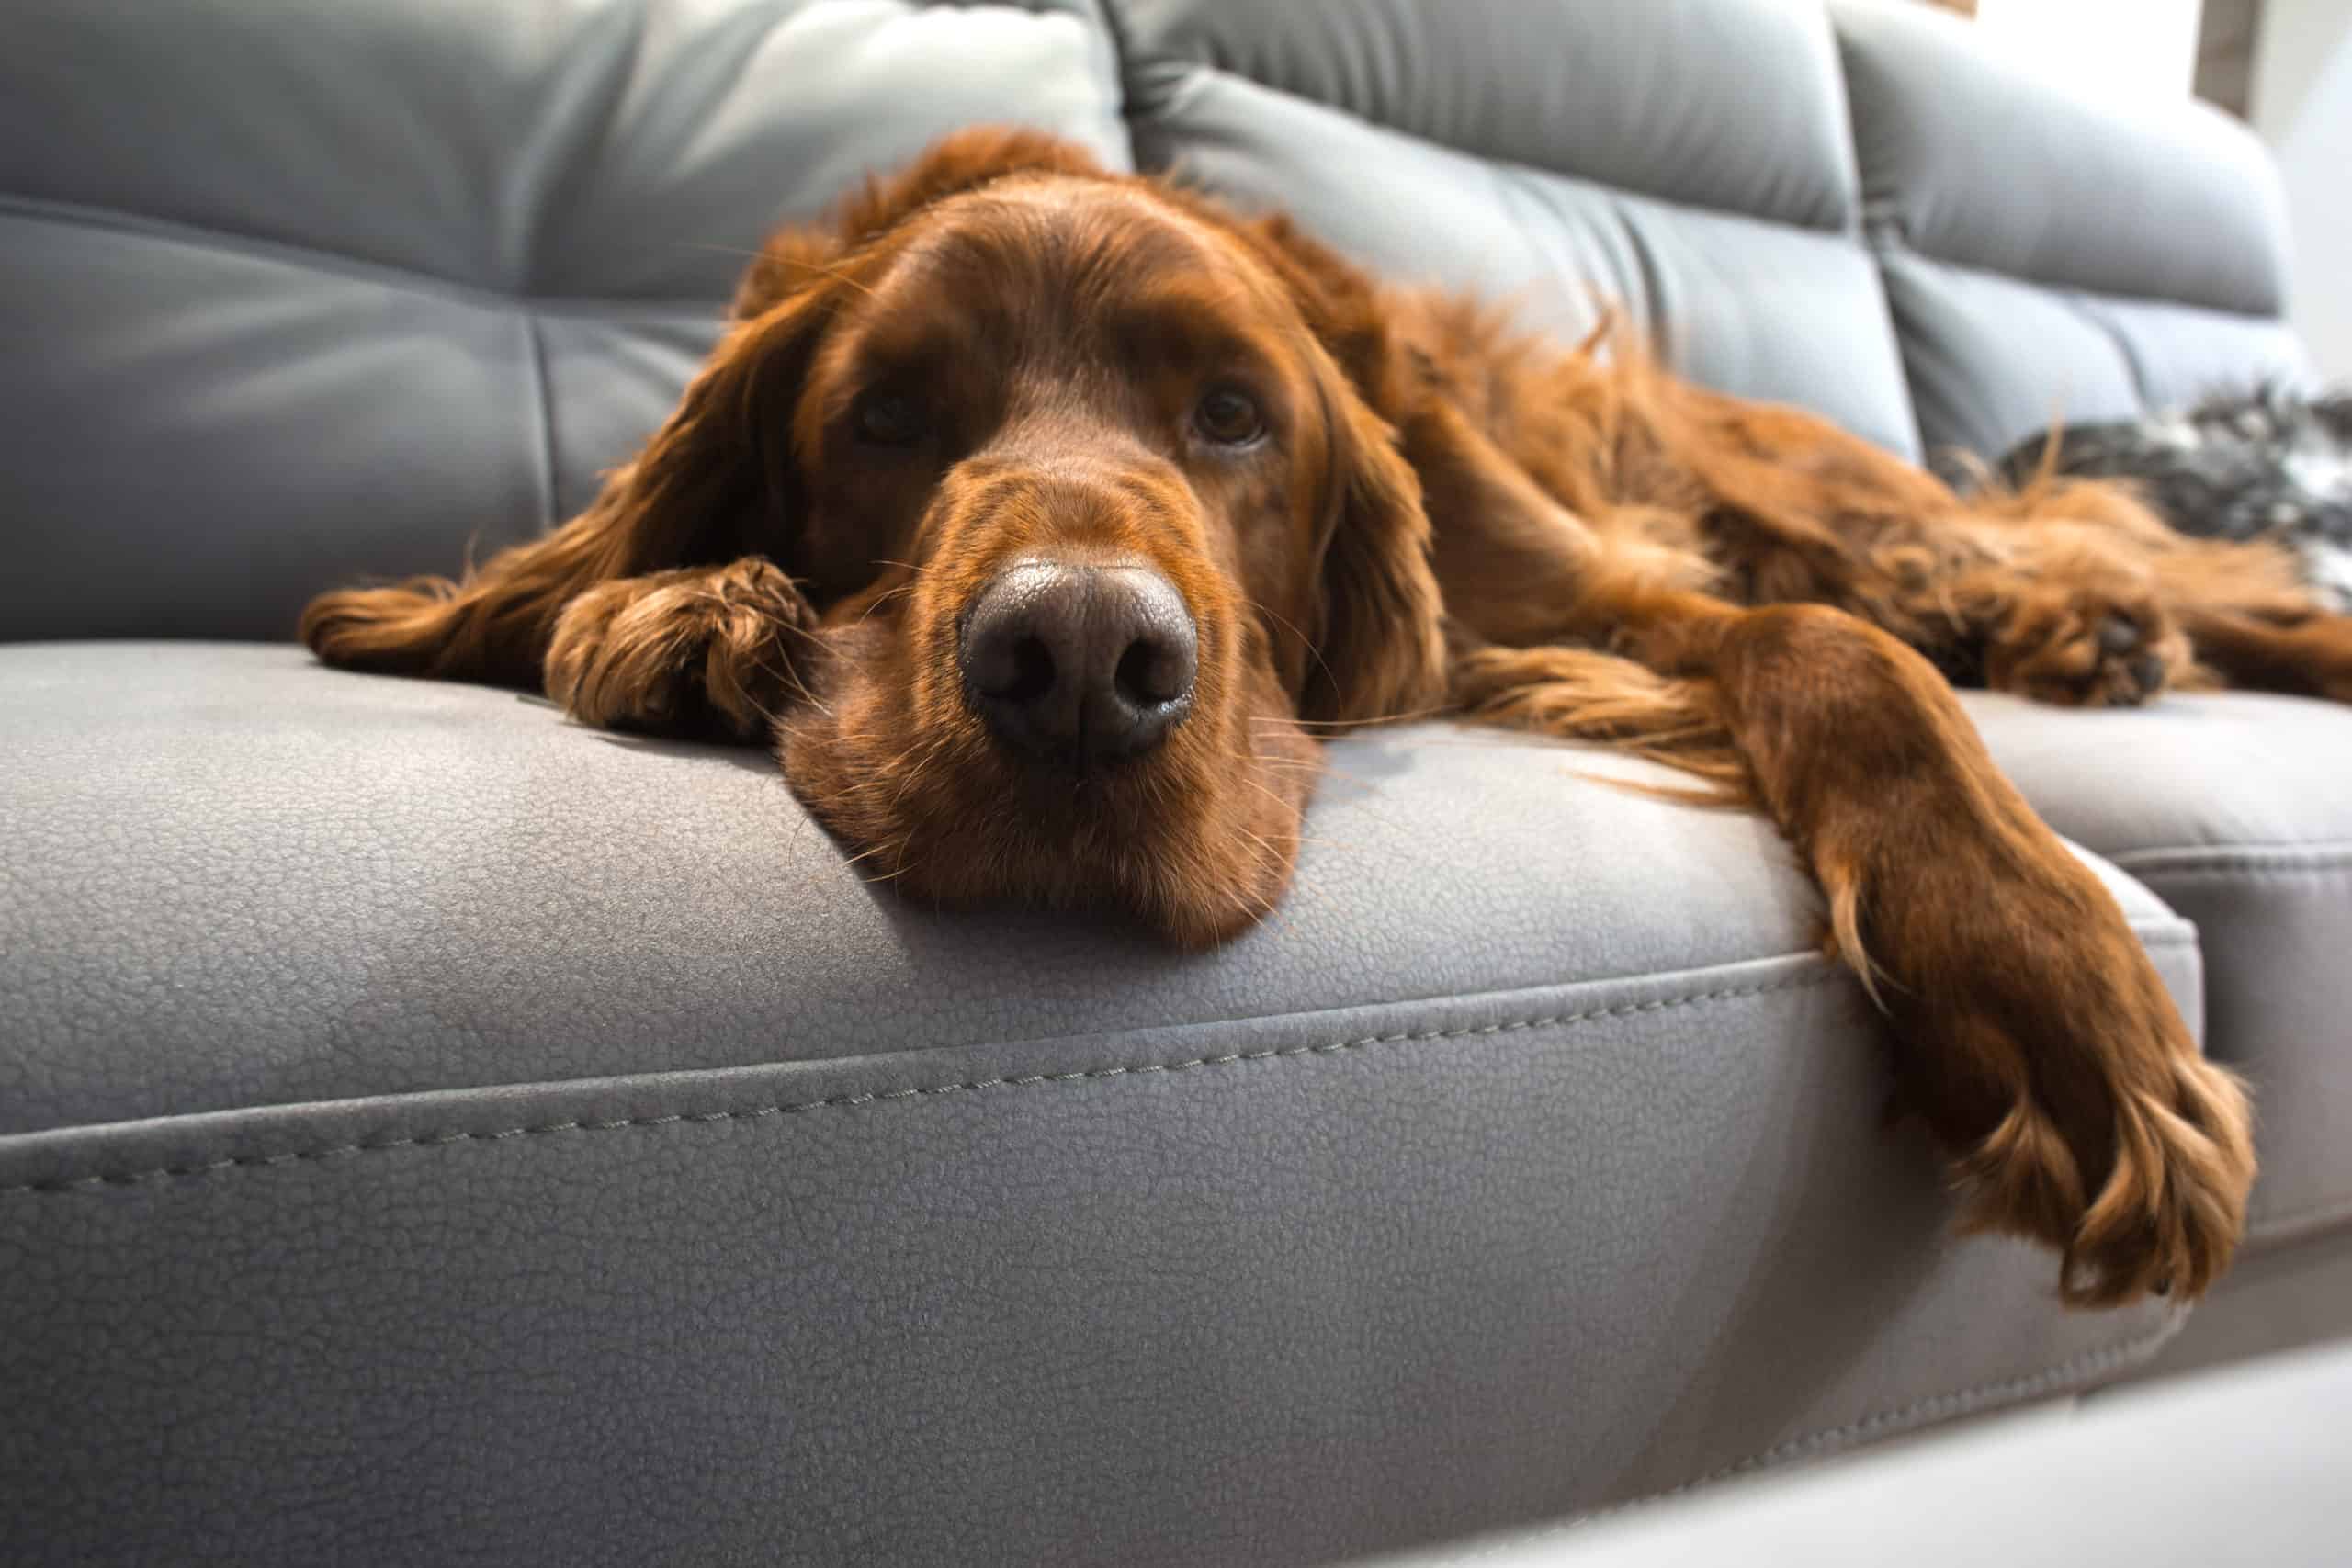 Why does my dog smell different when sleeping?